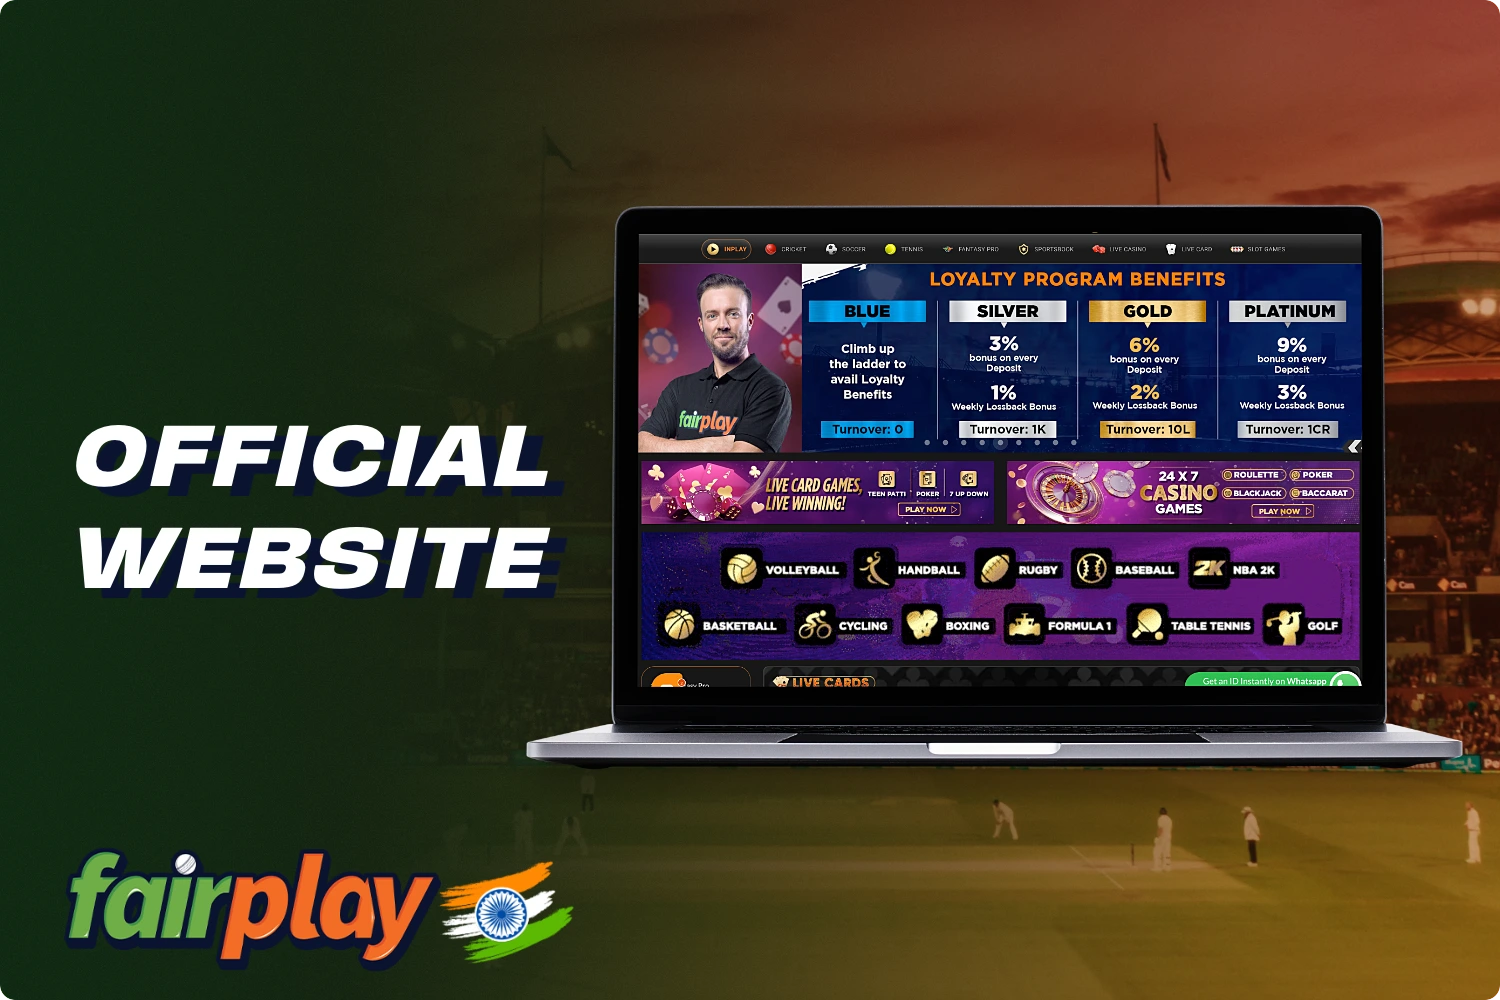 At the official Fairplay website, users from India can bet on sports and play online casino games